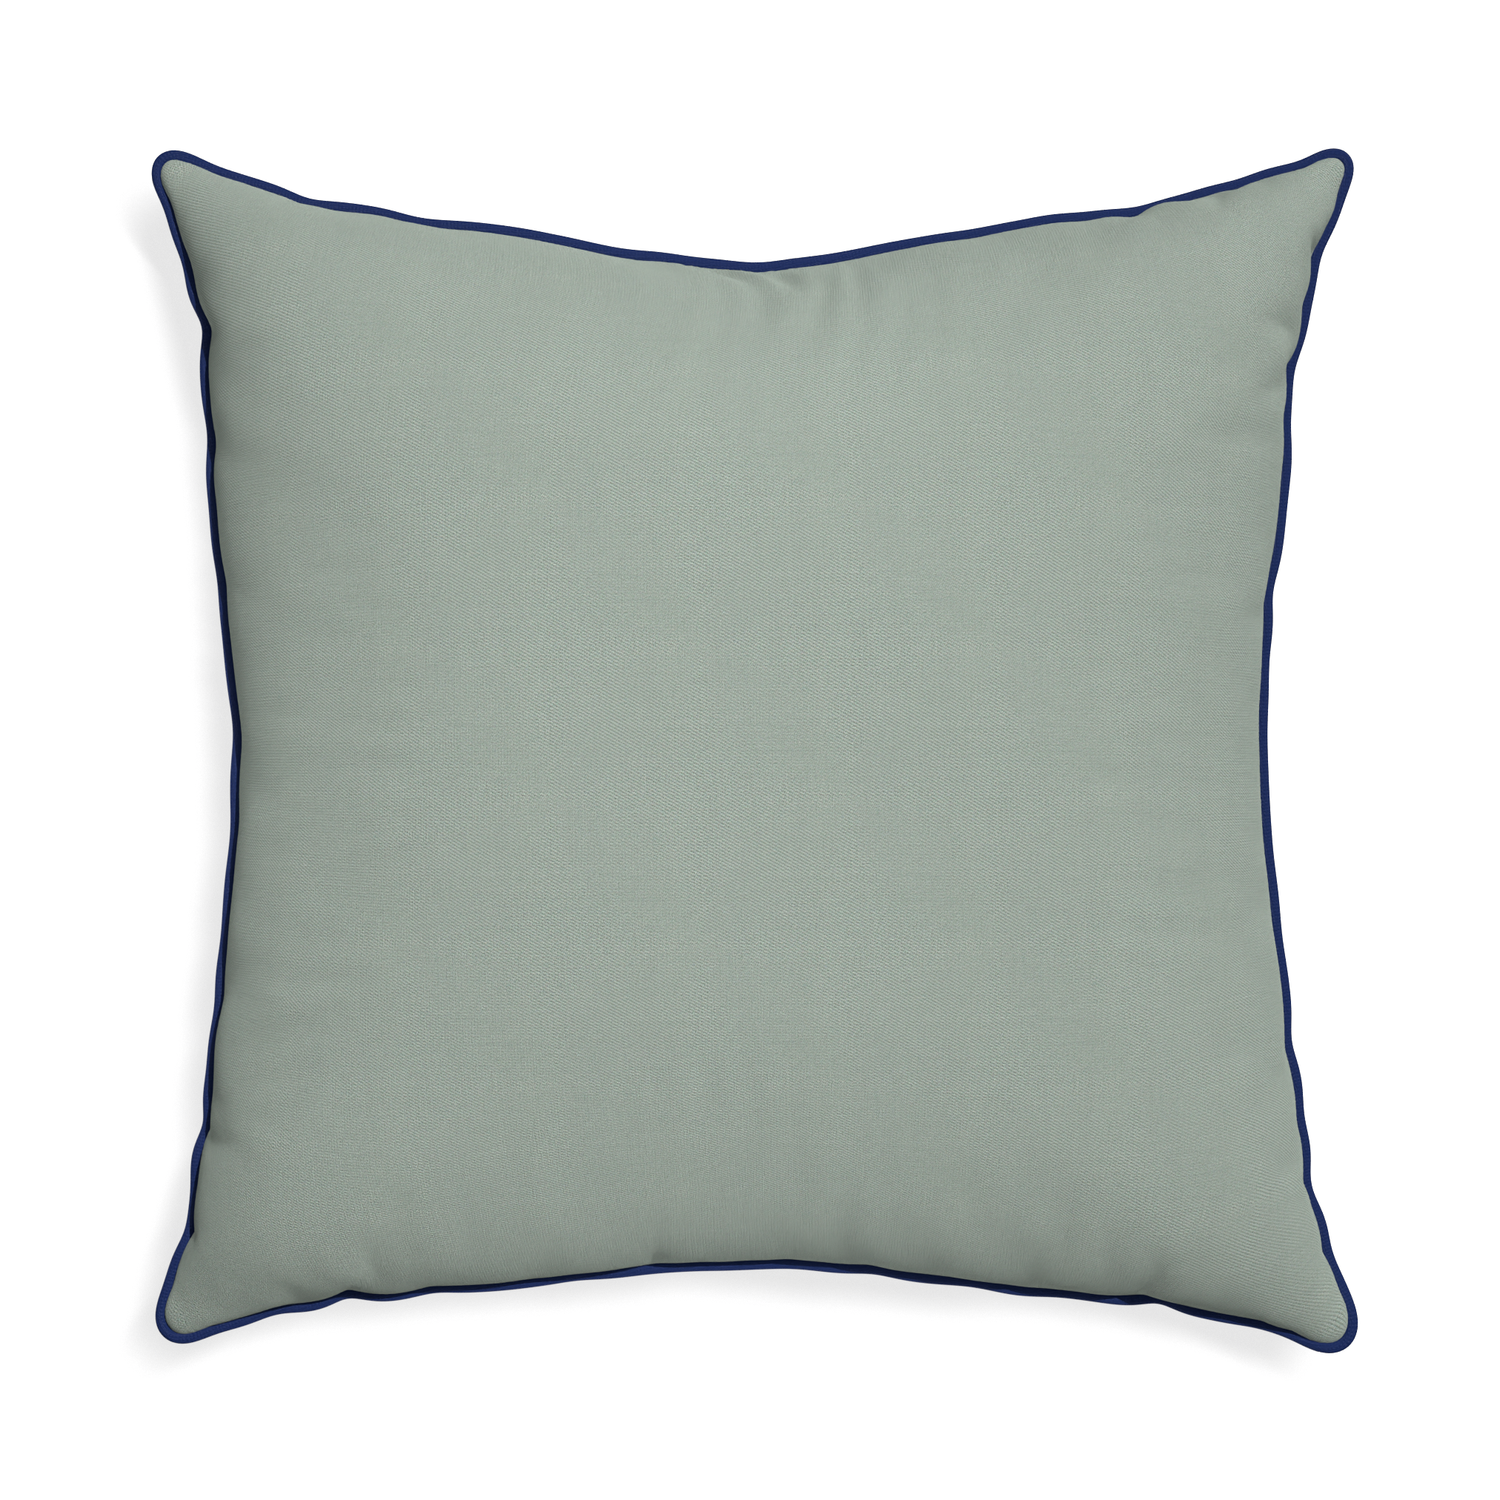 Euro-sham sage custom sage green cottonpillow with midnight piping on white background